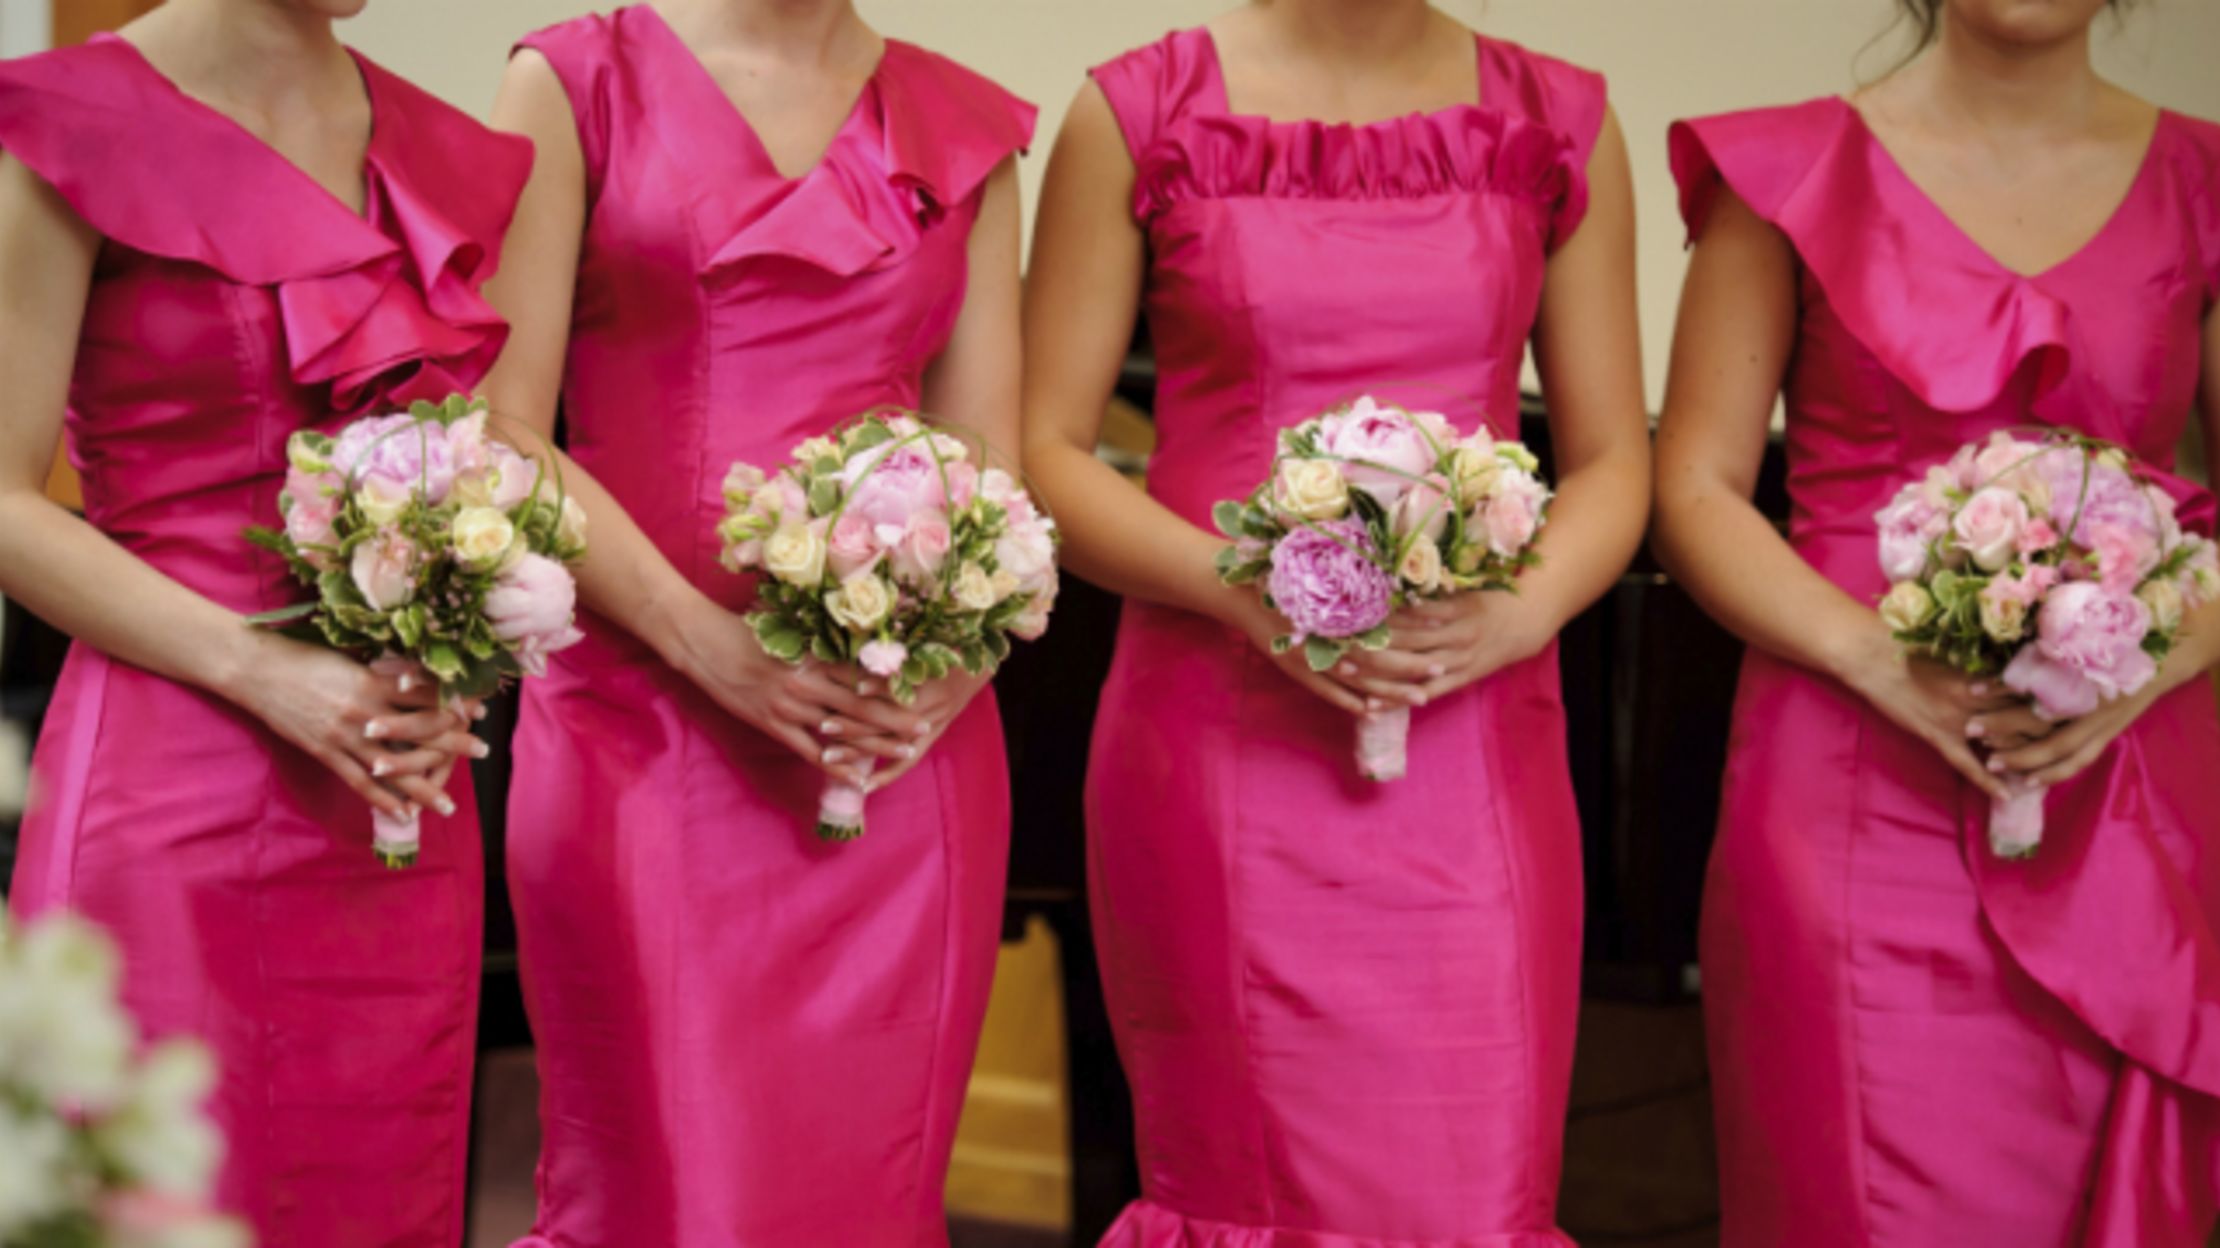 do bridesmaids and maid of honor wear the same dress